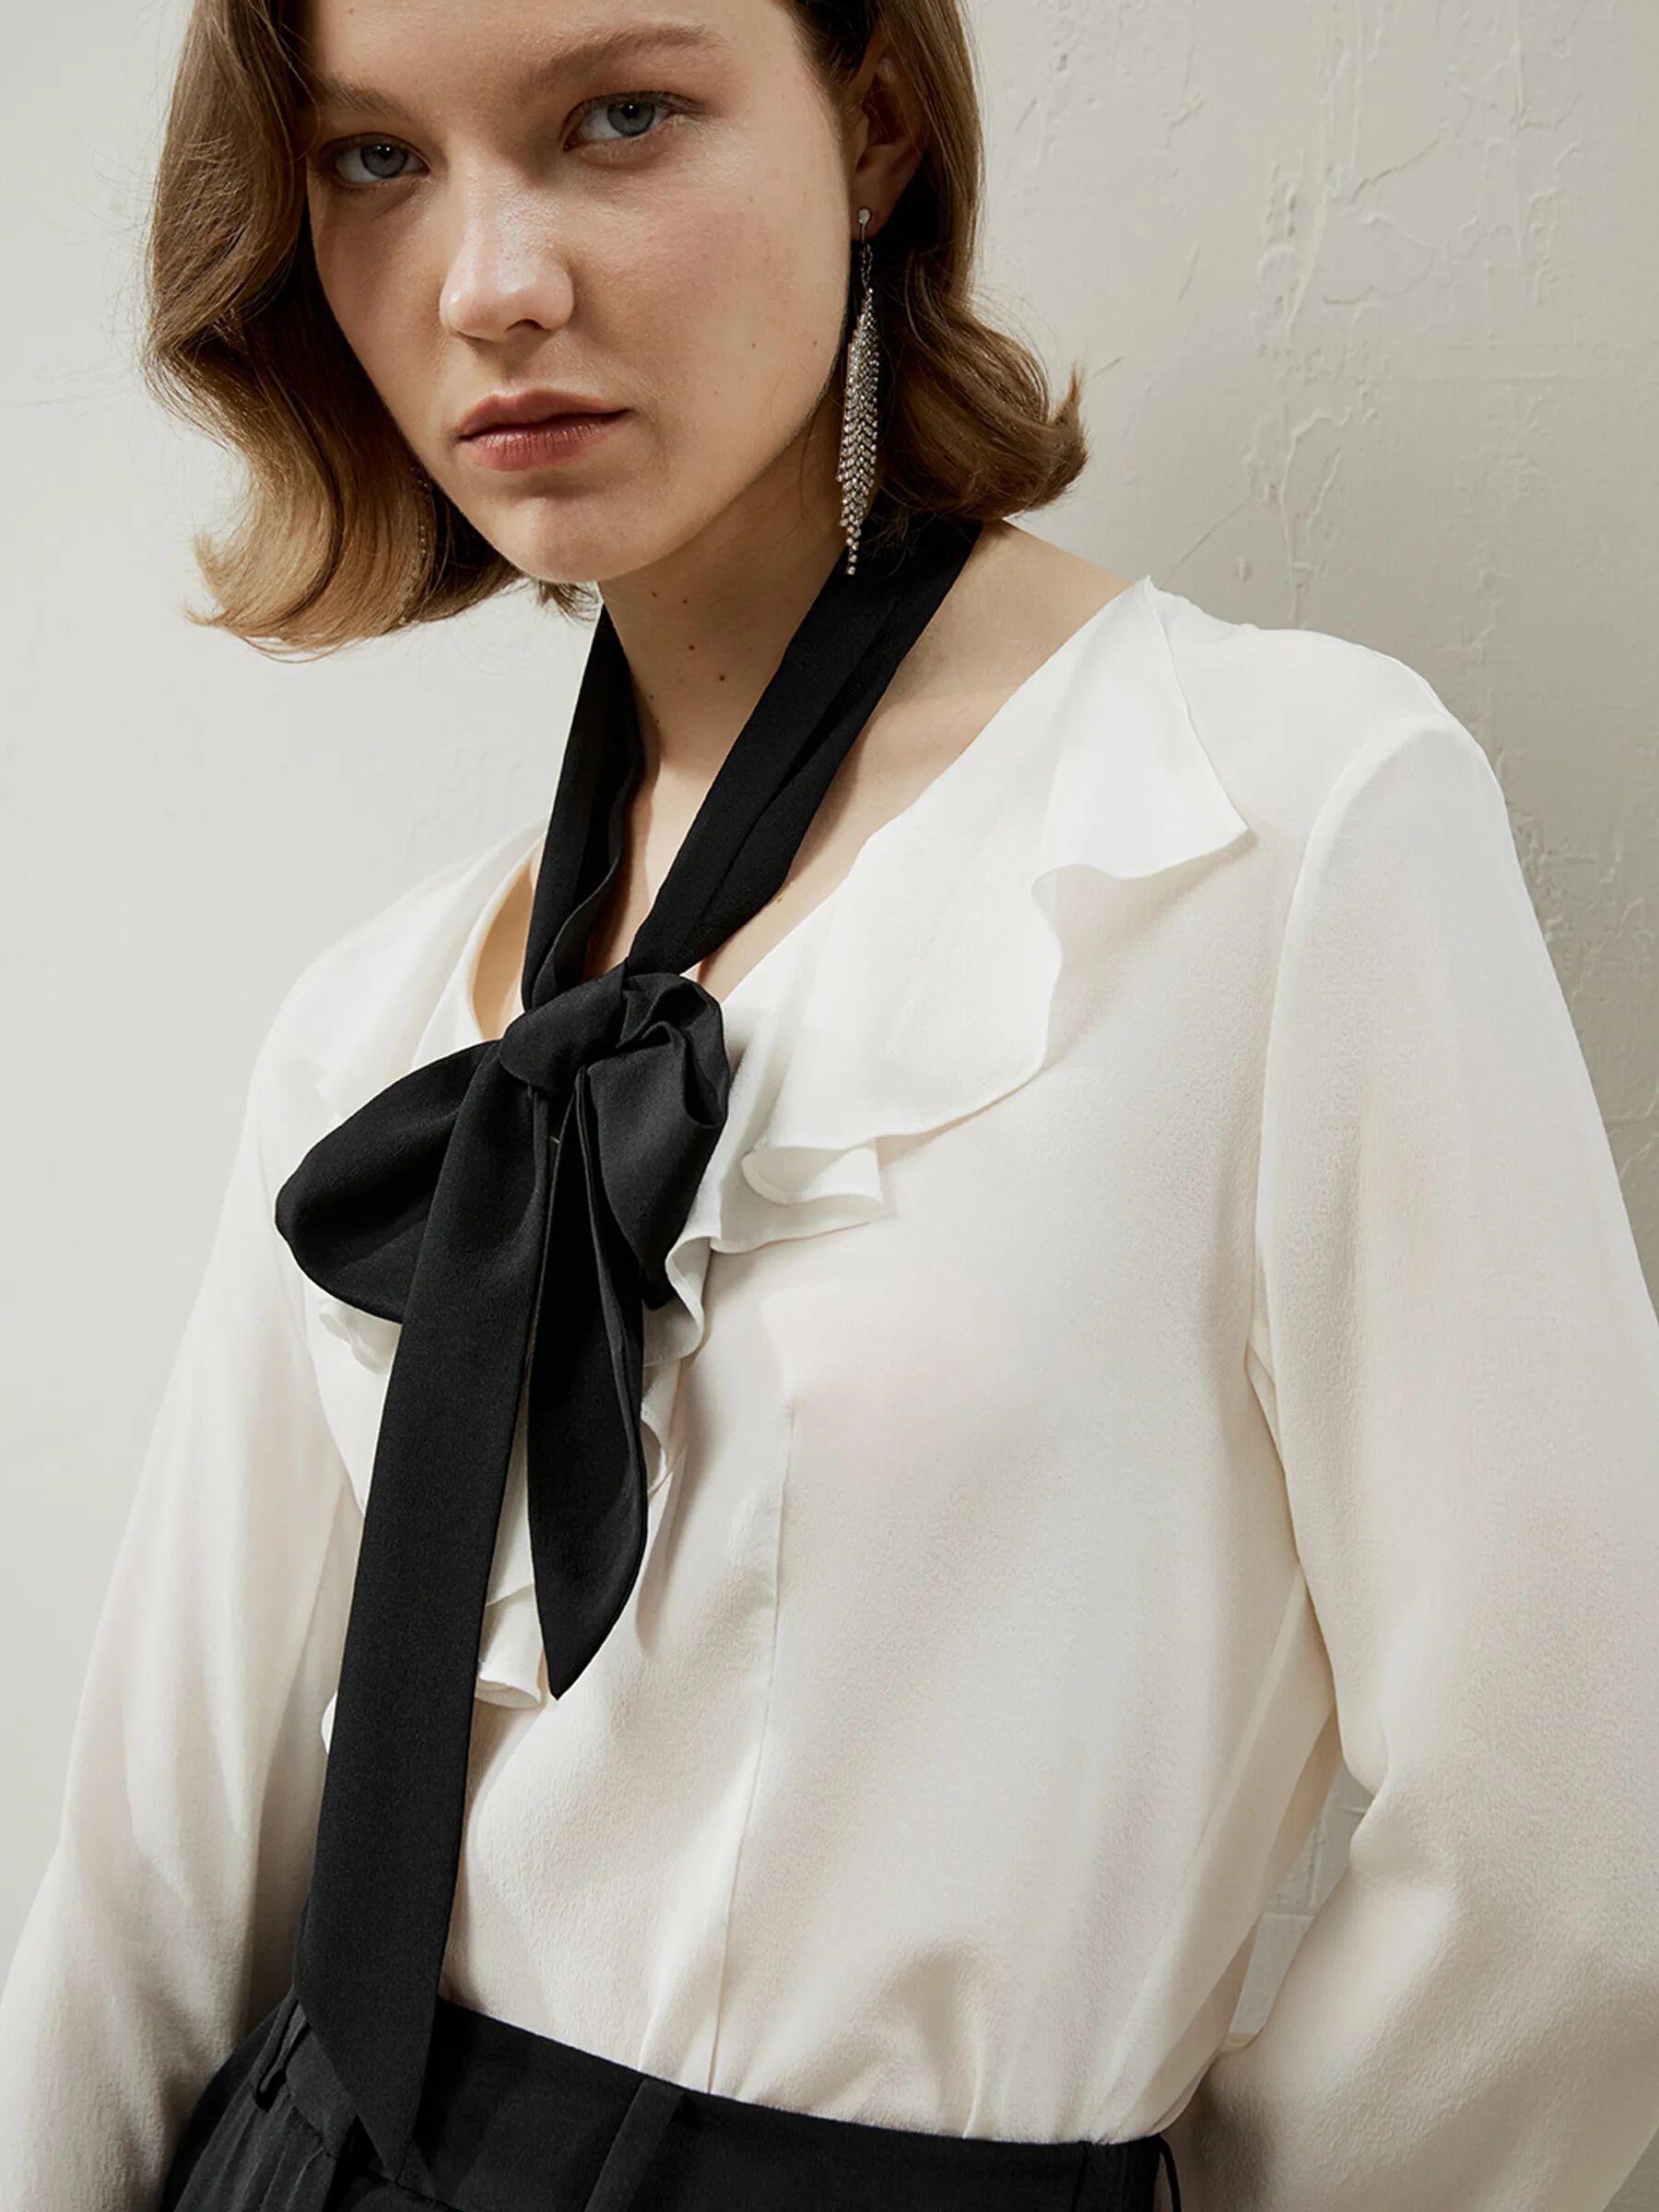 LILYSILK Business White Ruffled Blouse With Black Tie   Silk Ruffles Formal   Shirt Women Skin-Friendly And Breathable Ruffle Bowneck 10